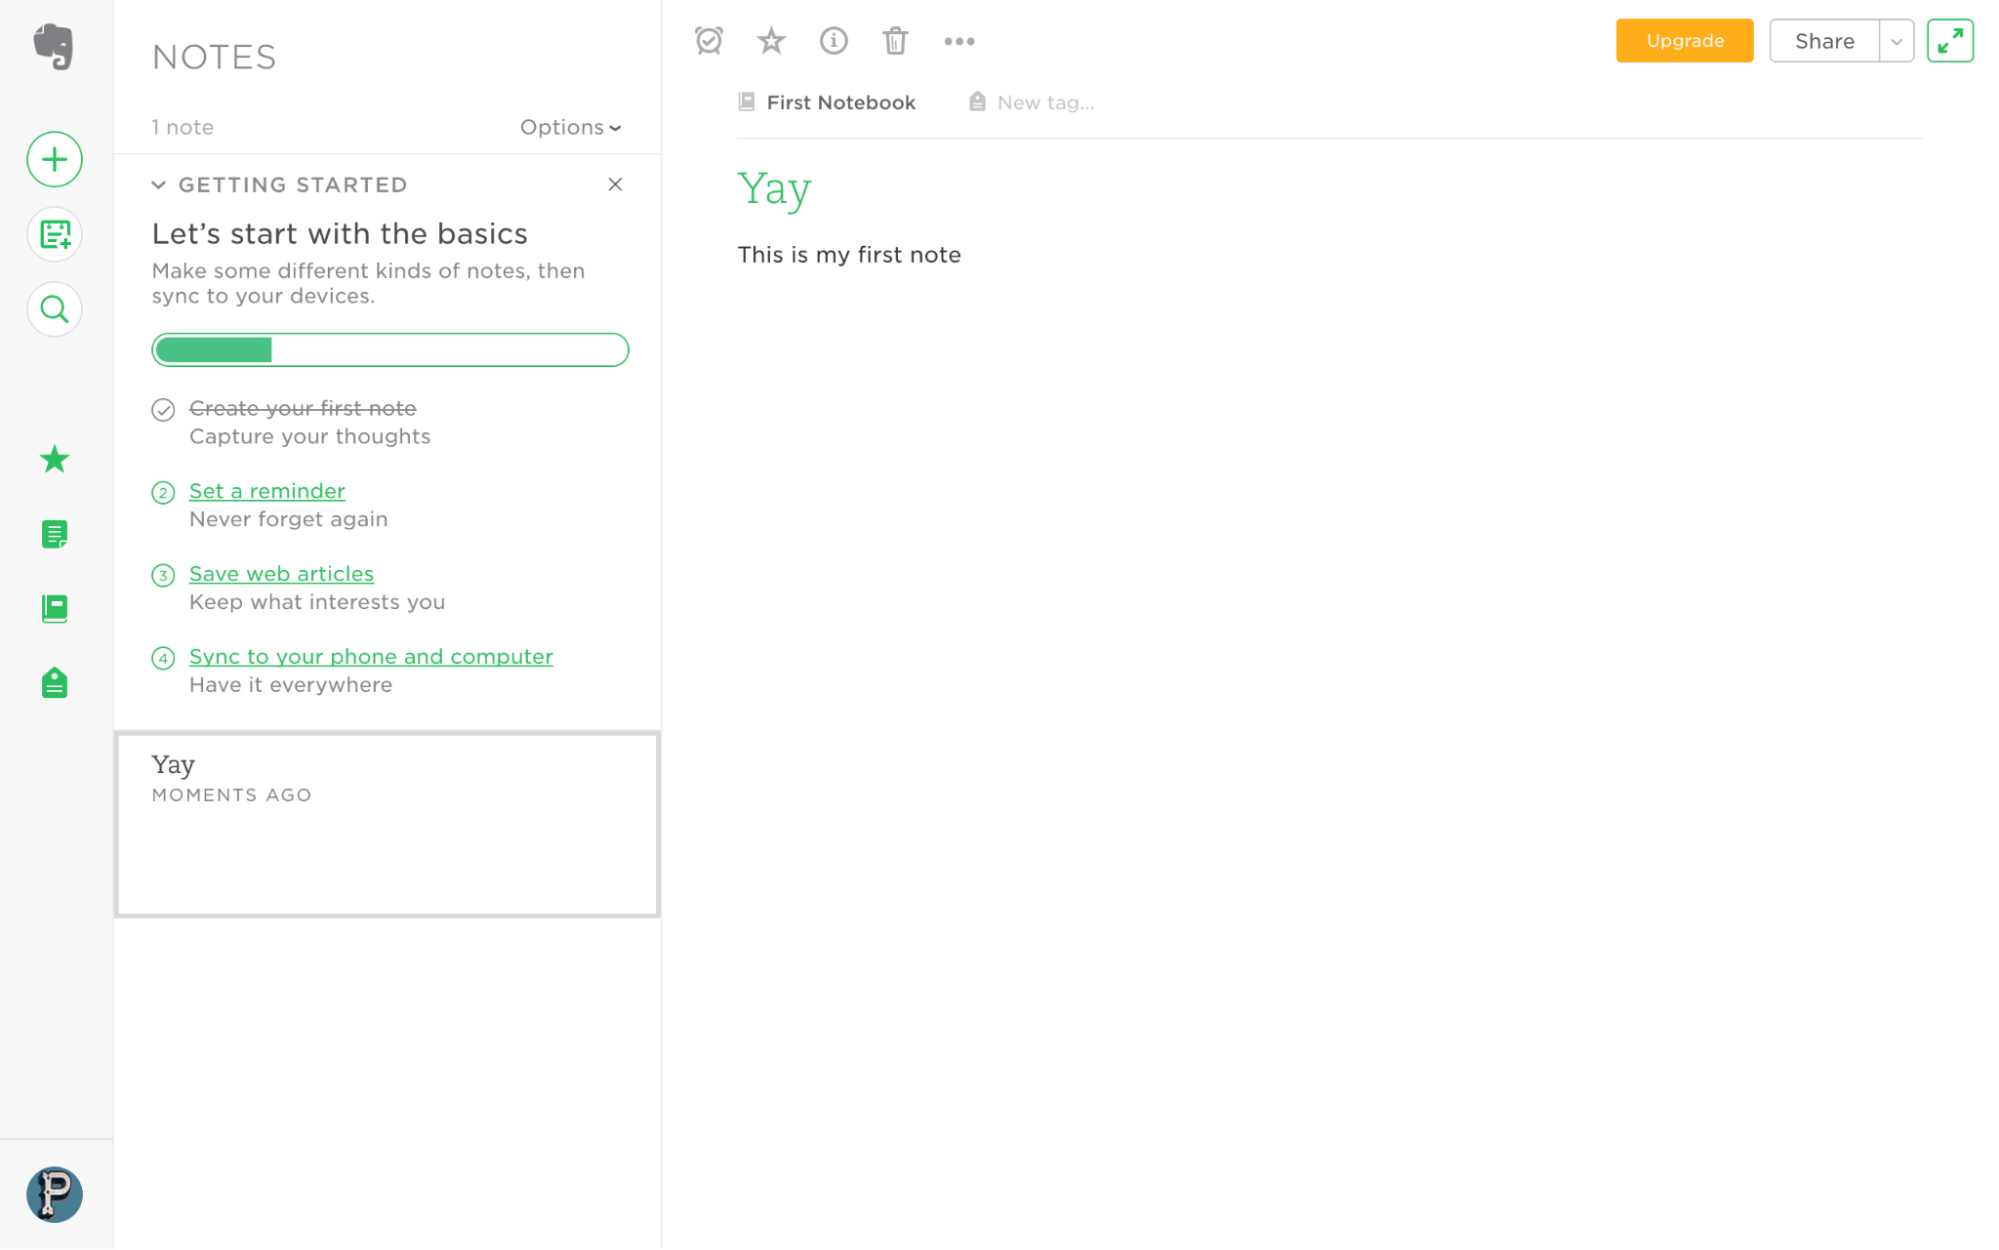 Example of Evernote's onboarding process using checklists